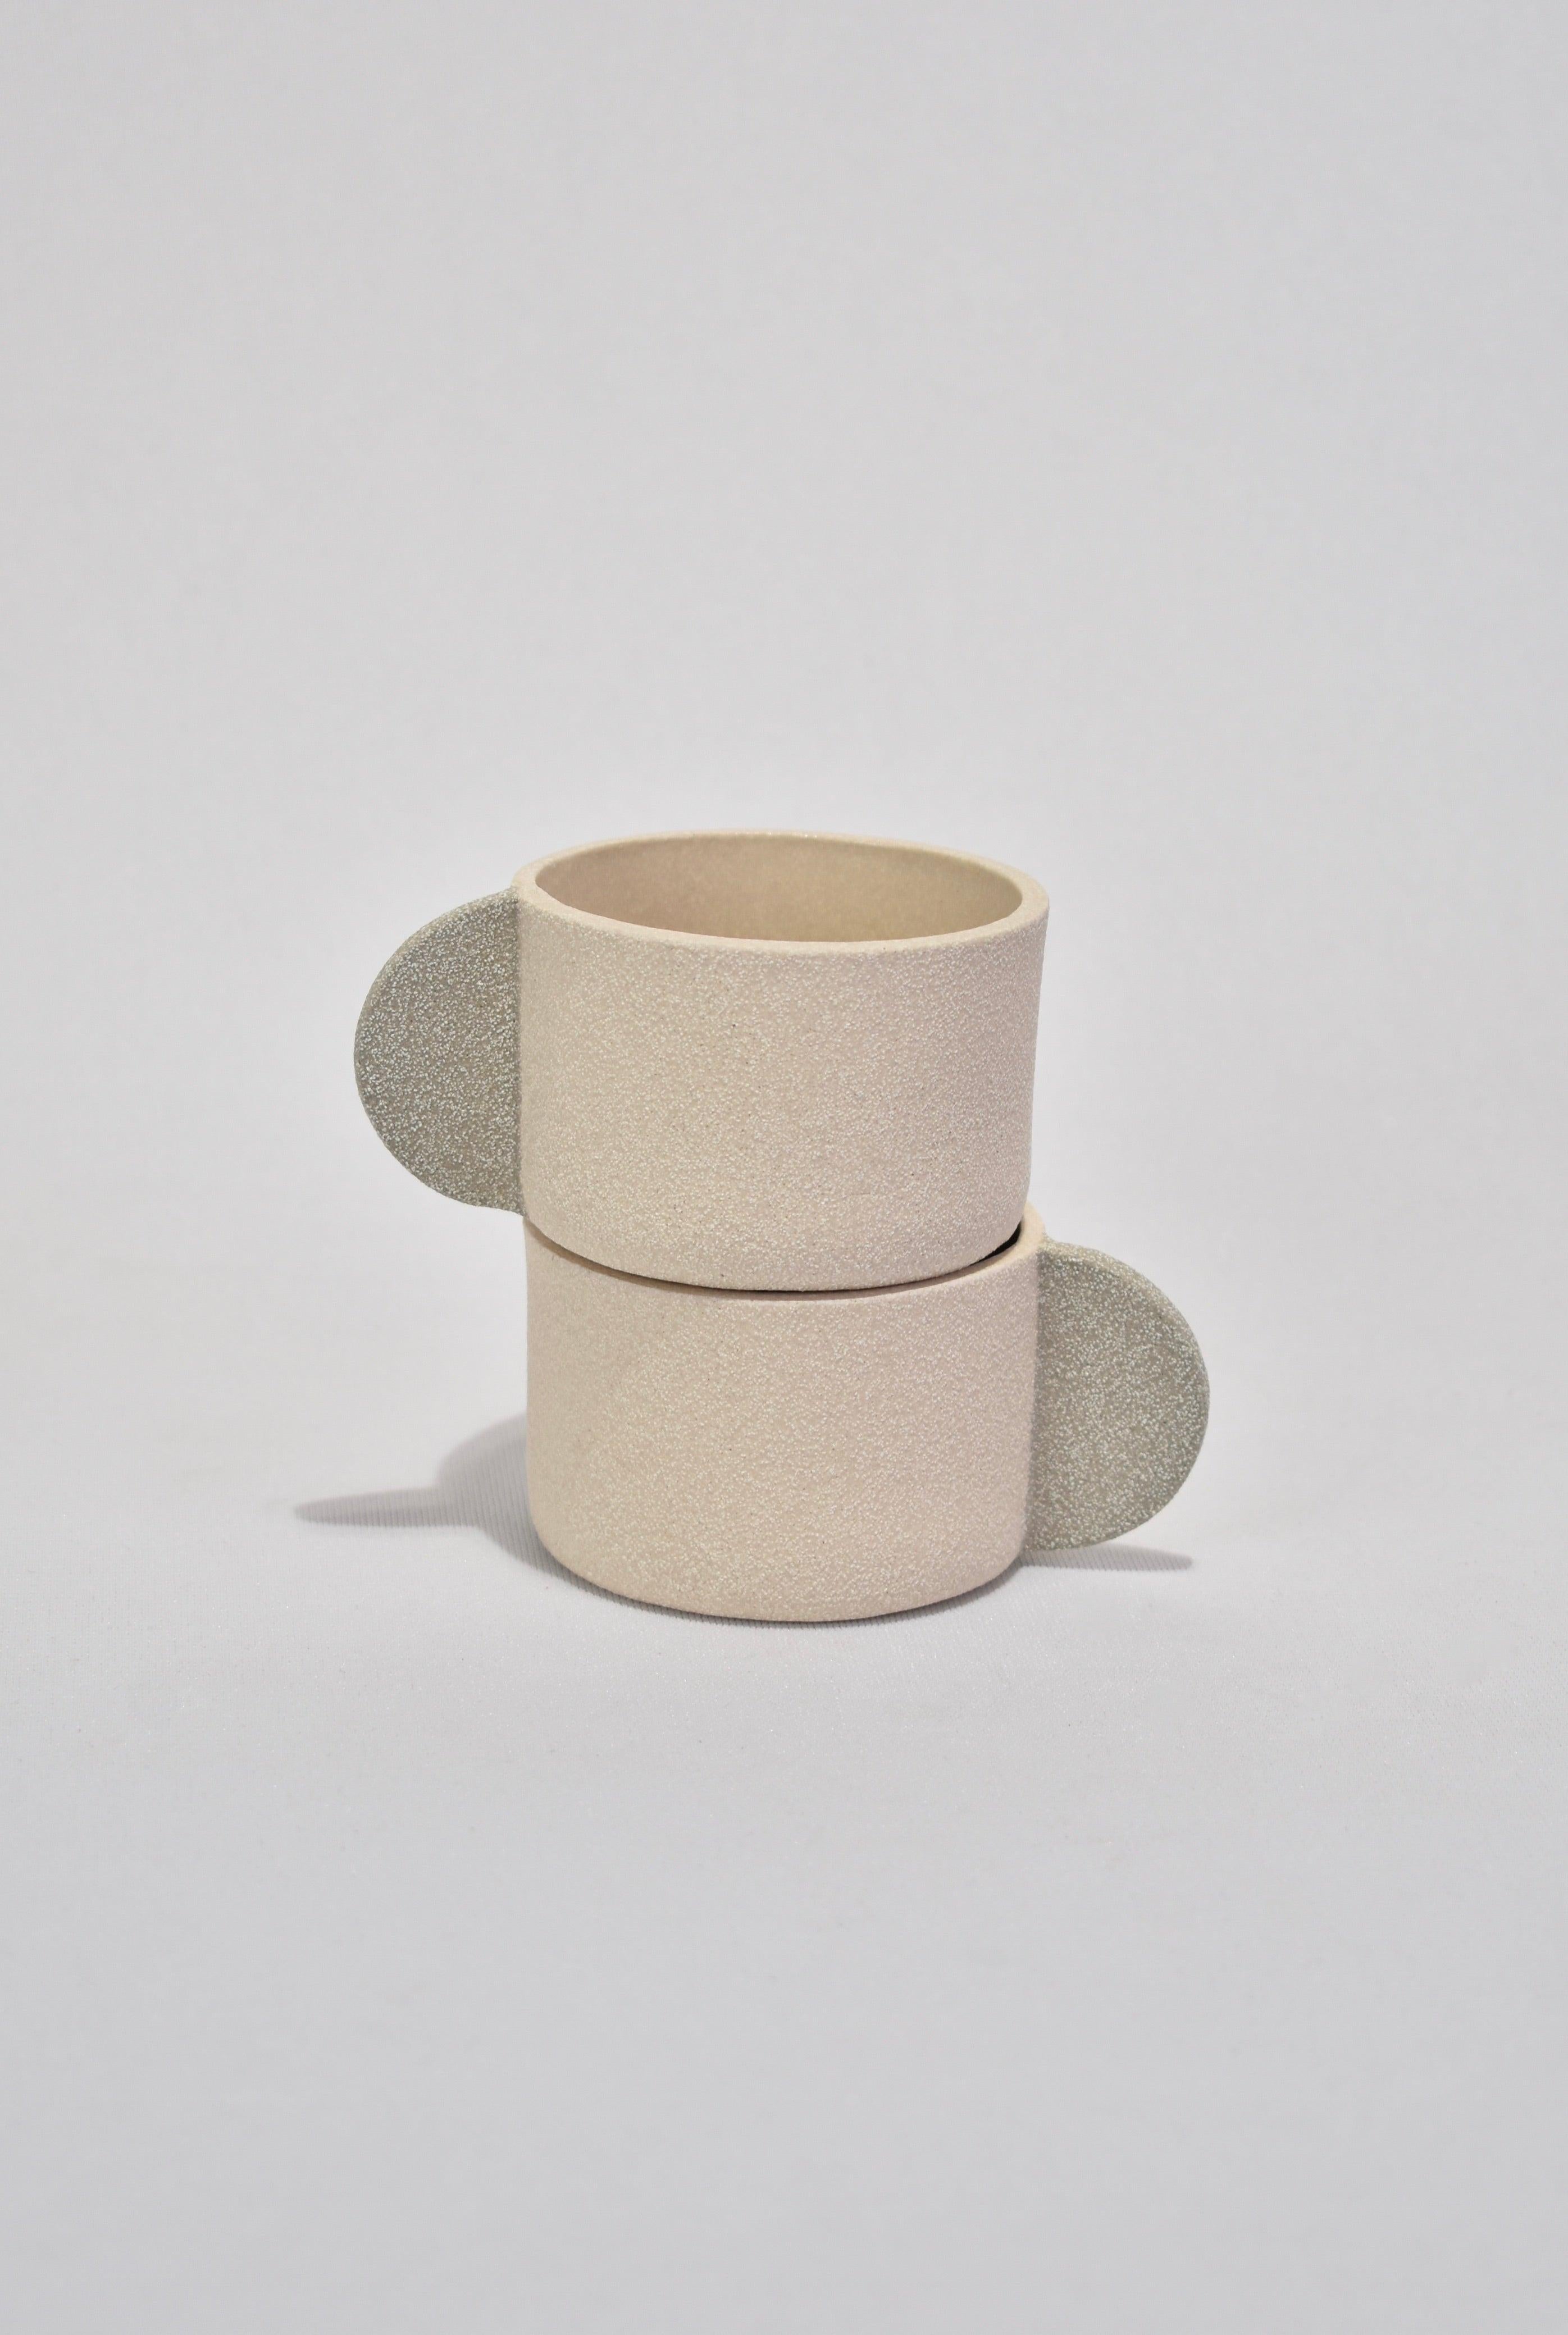 Sand stoneware double espresso set with a textured matte exterior and transparent gloss glaze on the interior. Each cup features a light grey semi-circle handle and BRUTES stamped on base. Set includes two cups.

Handmade in London by Emma de